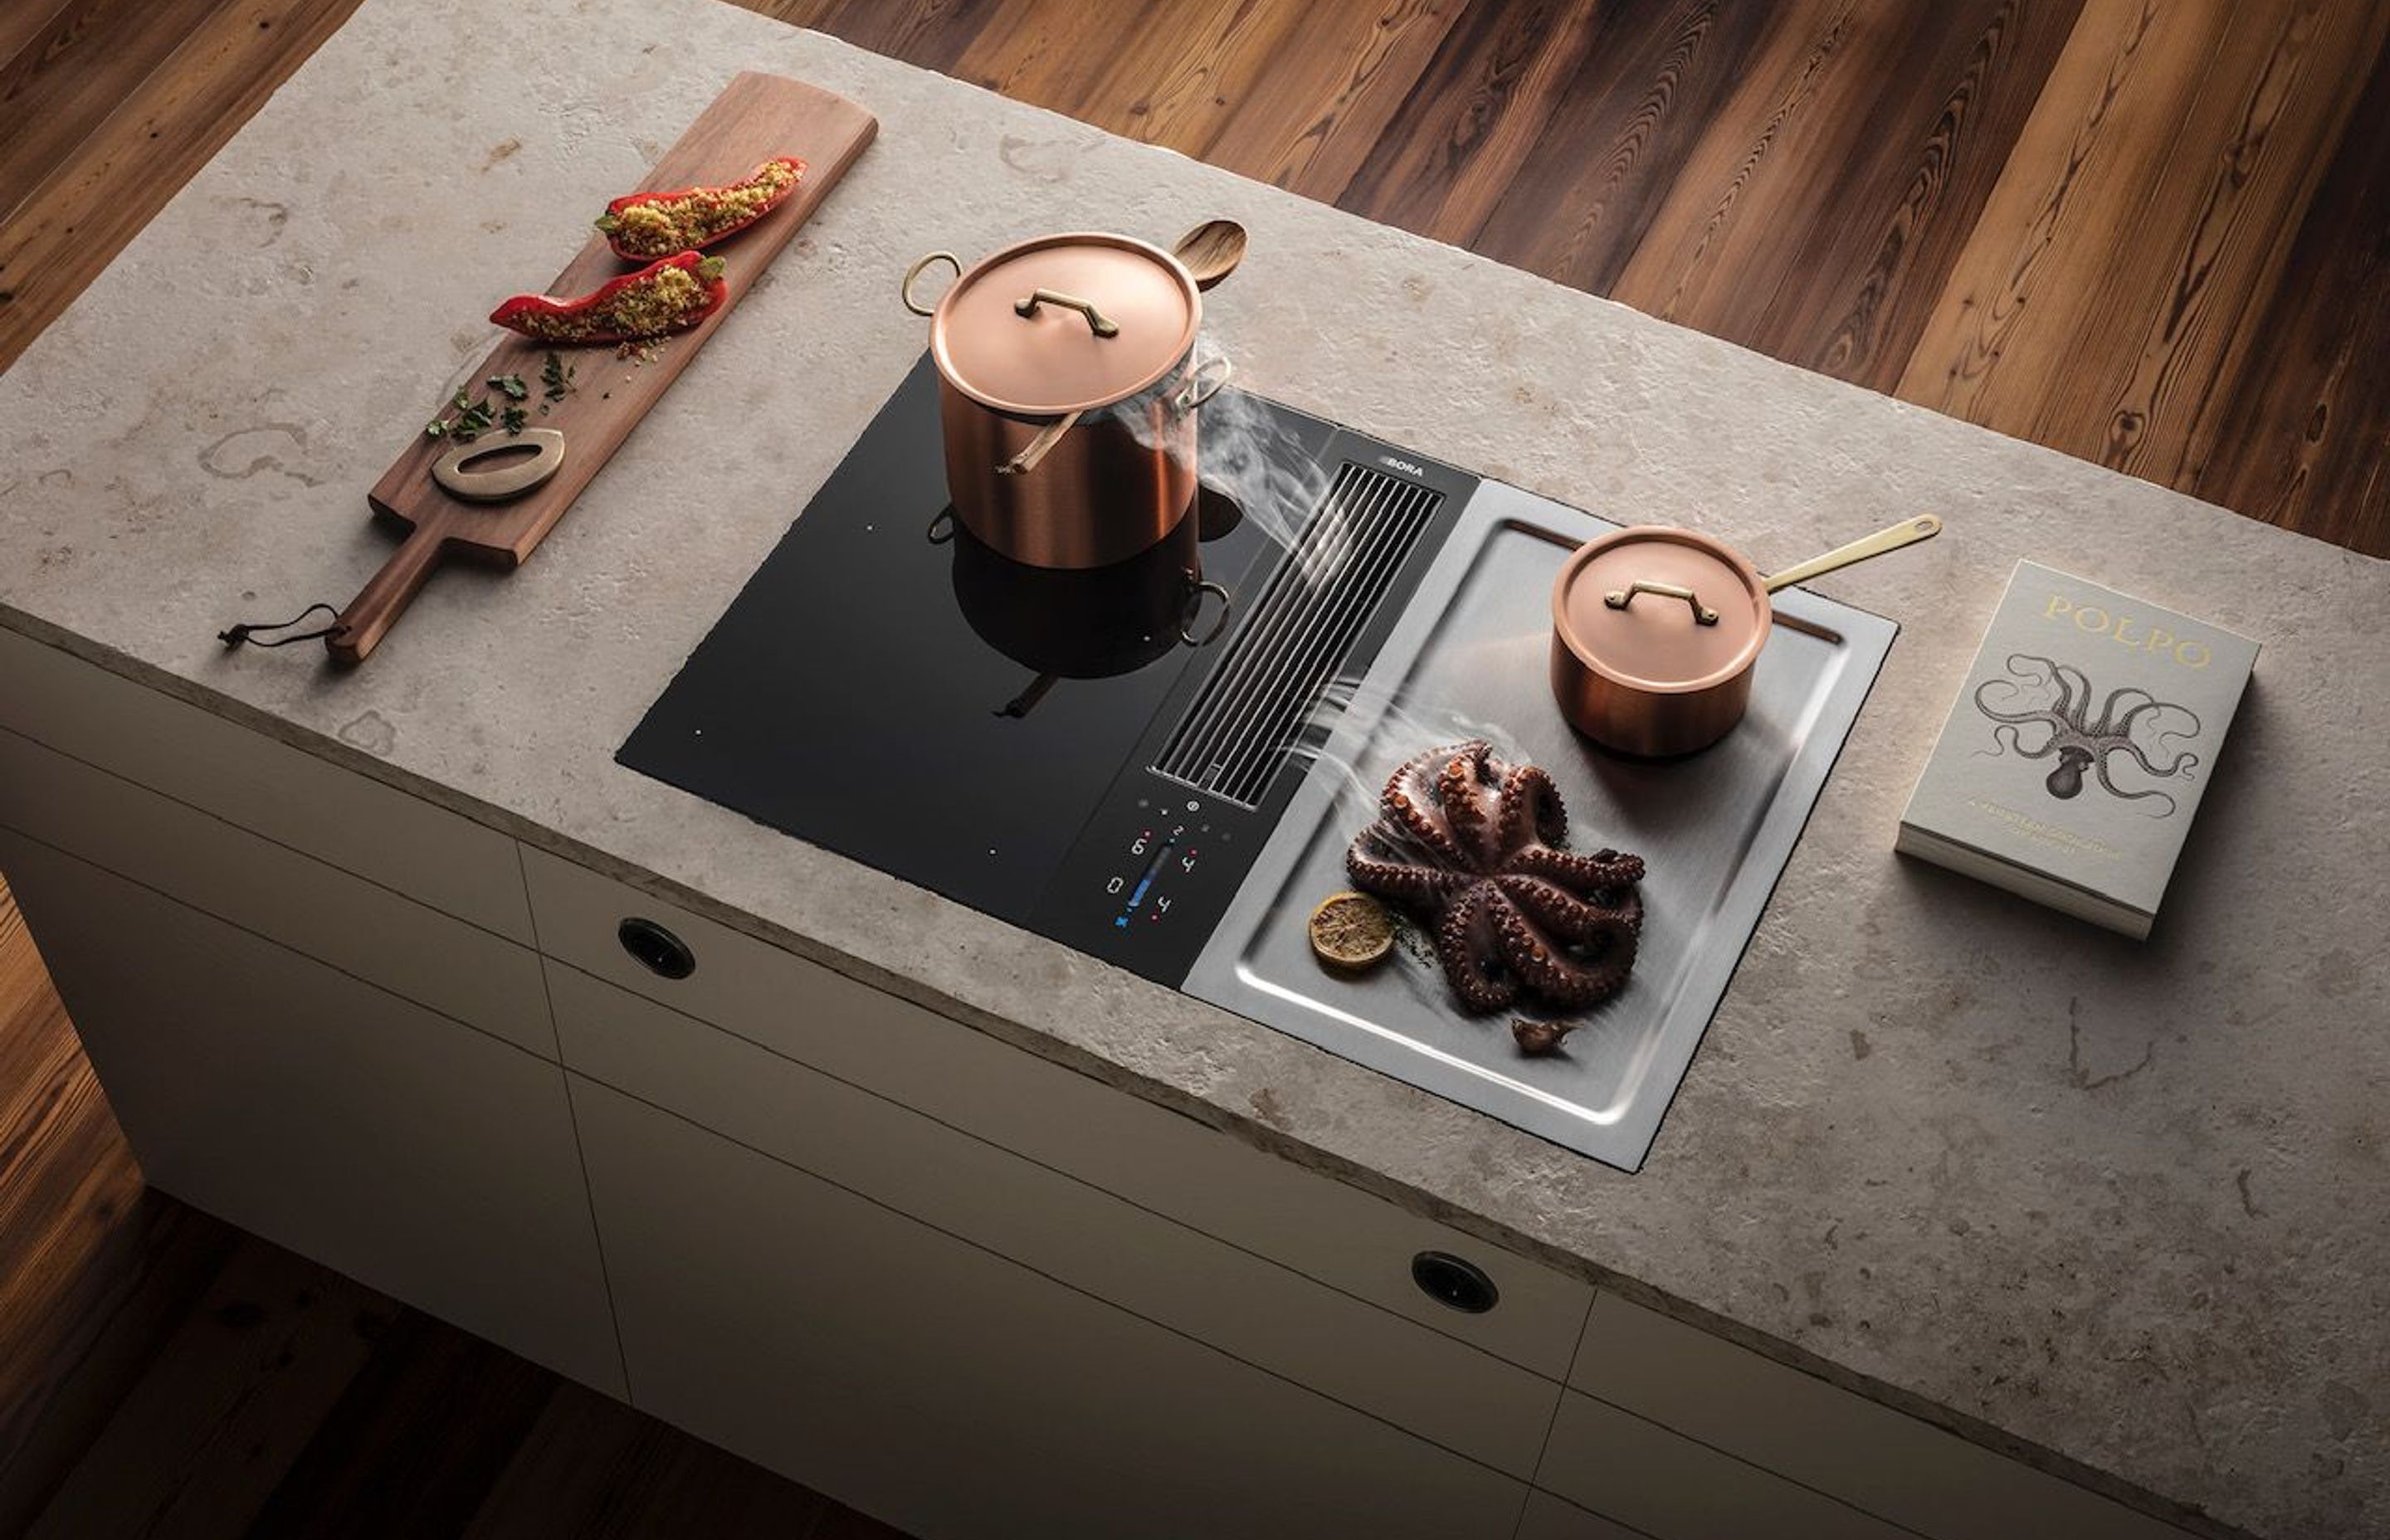 The BORA Classic 2.0 is a modular cooktop and extractor system designed to be seamlessly integrated into island benches.